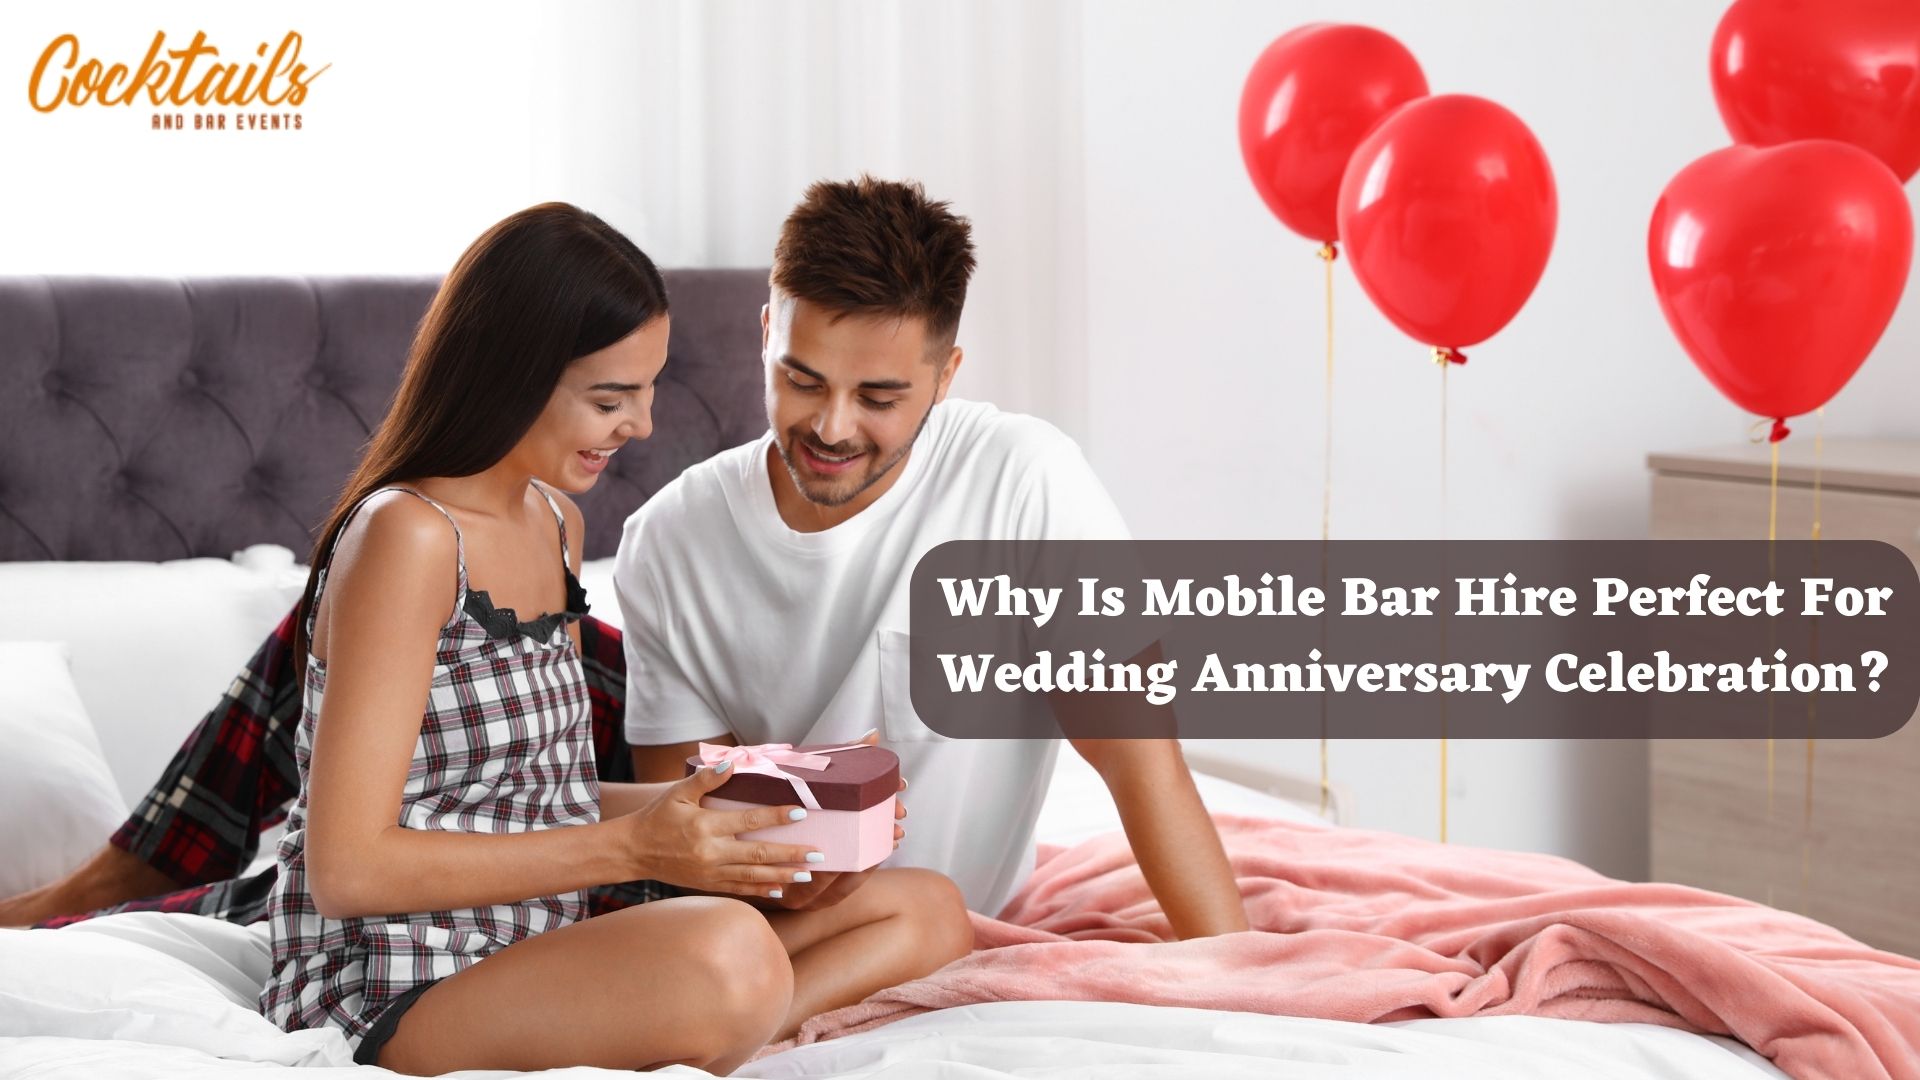 Why Is Mobile Bar Hire Perfect For Wedding Anniversary Celebration? -